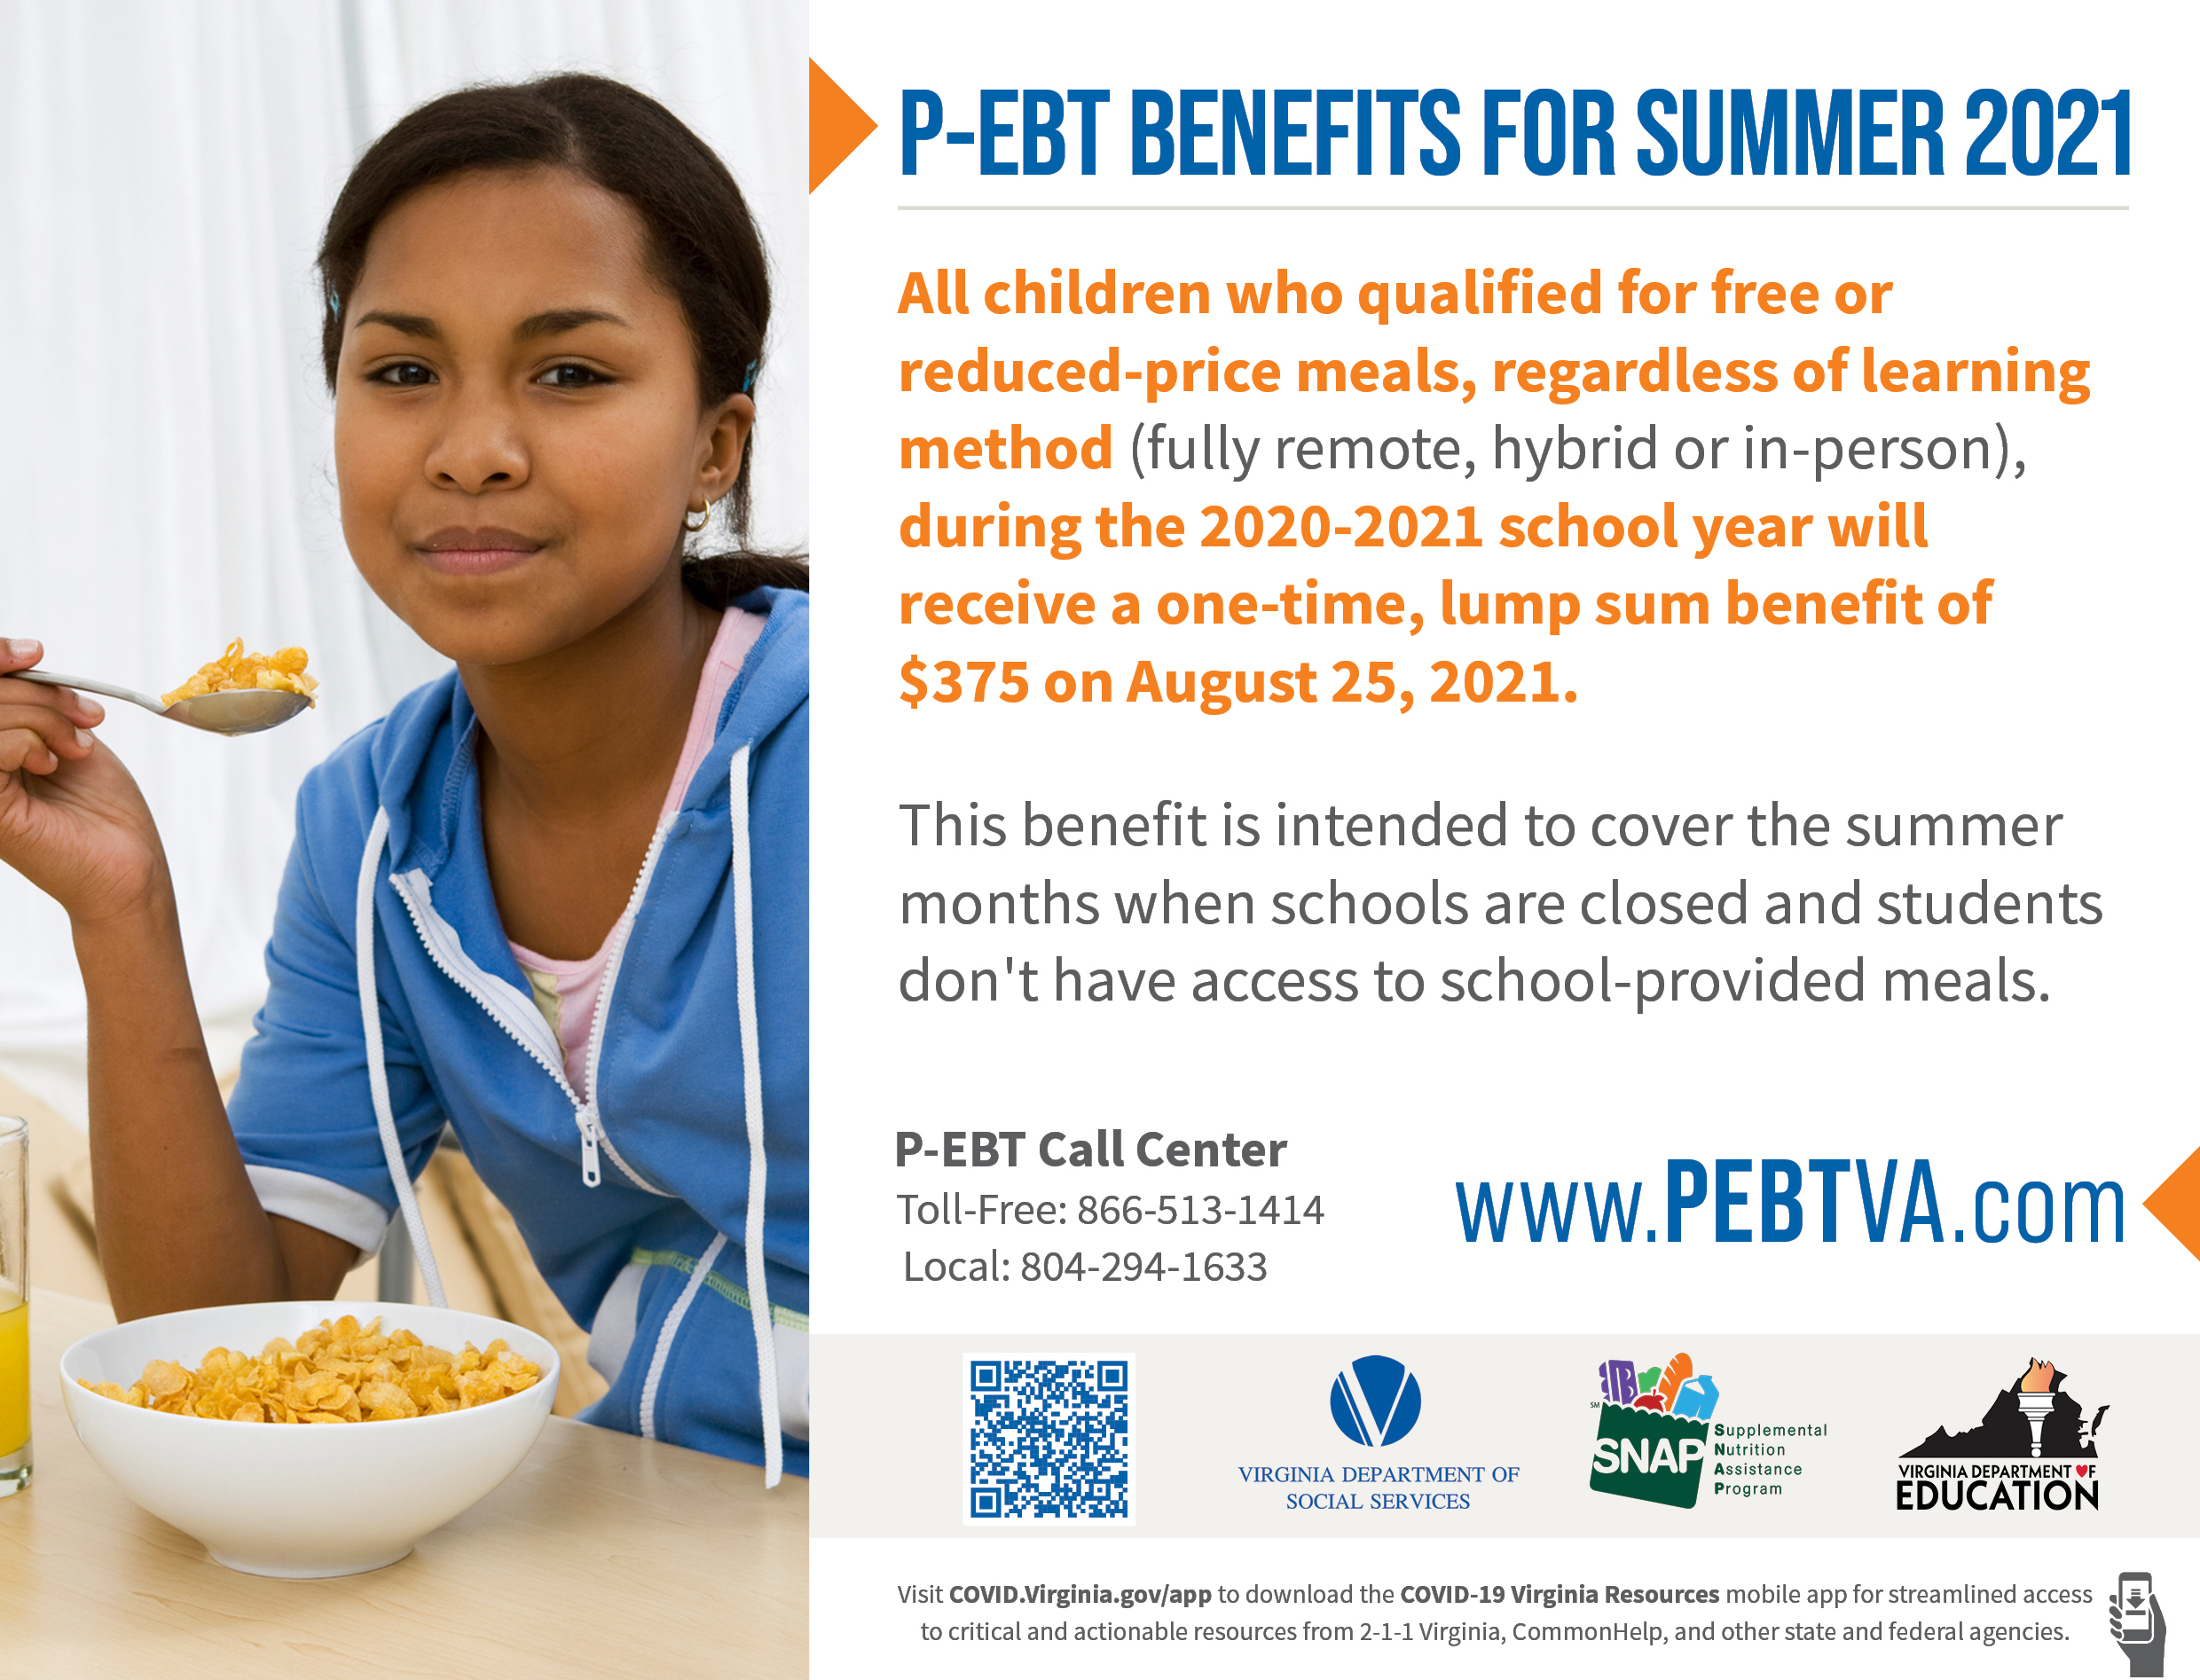 All Students will receive this PEBT benefit